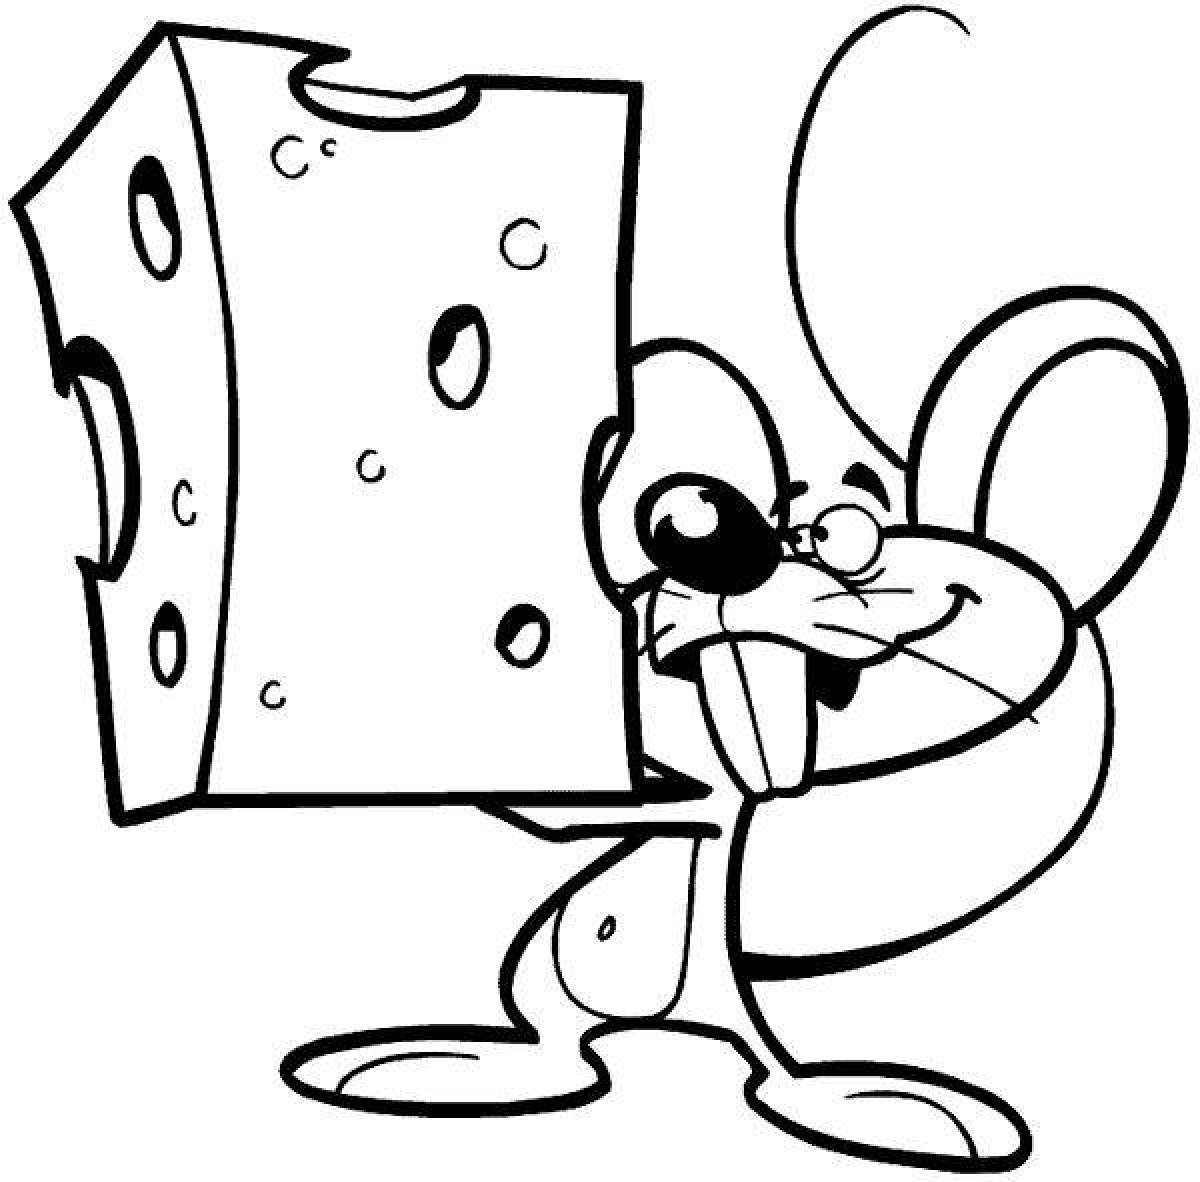 Coloring page cheeky little mouse with cheese